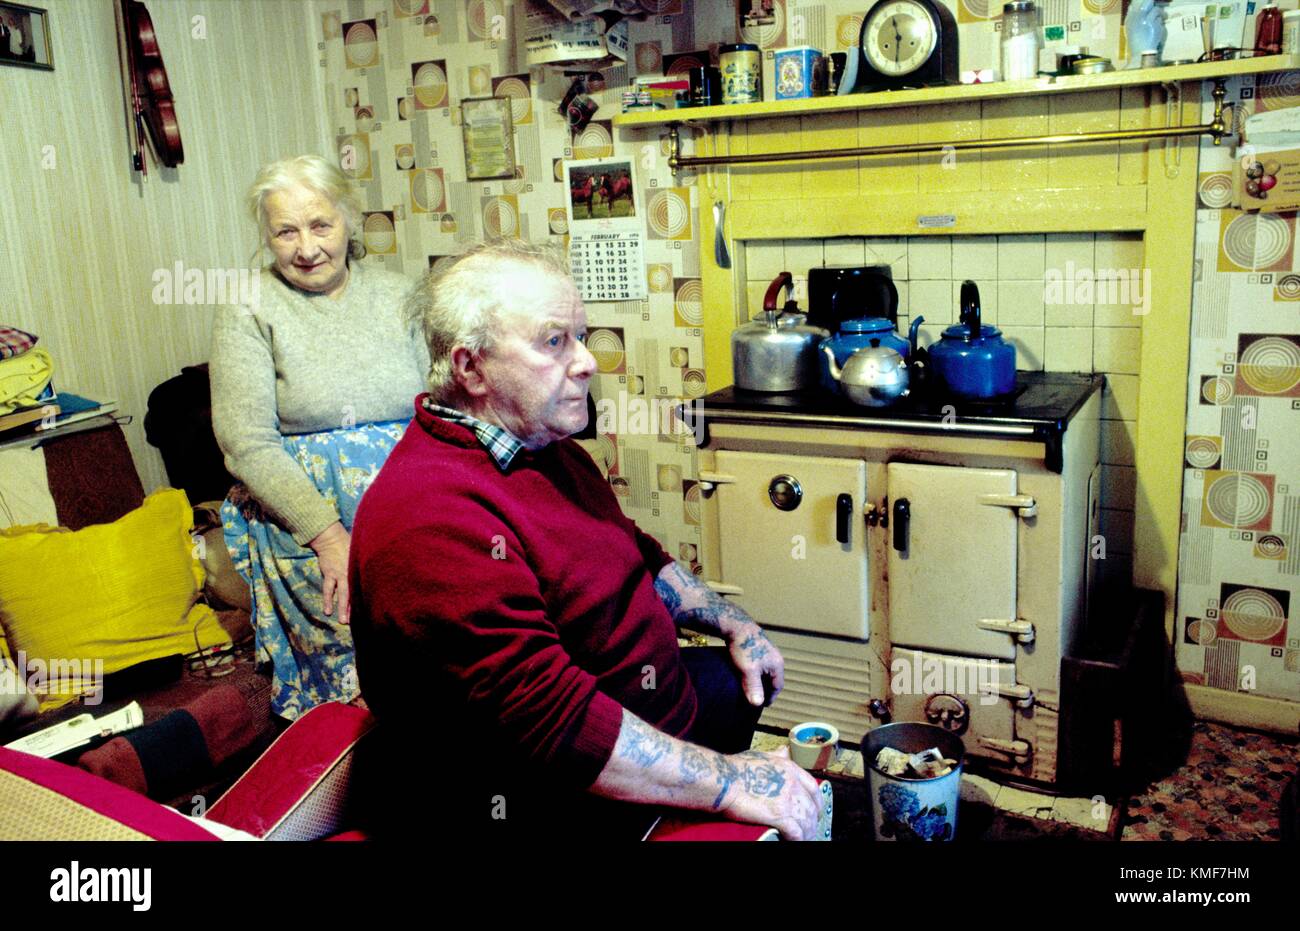 Elderly crofters in their home at Dales Voe, Mainland, Shetland Islands, Scotland. Photographed in 1976. Stock Photo